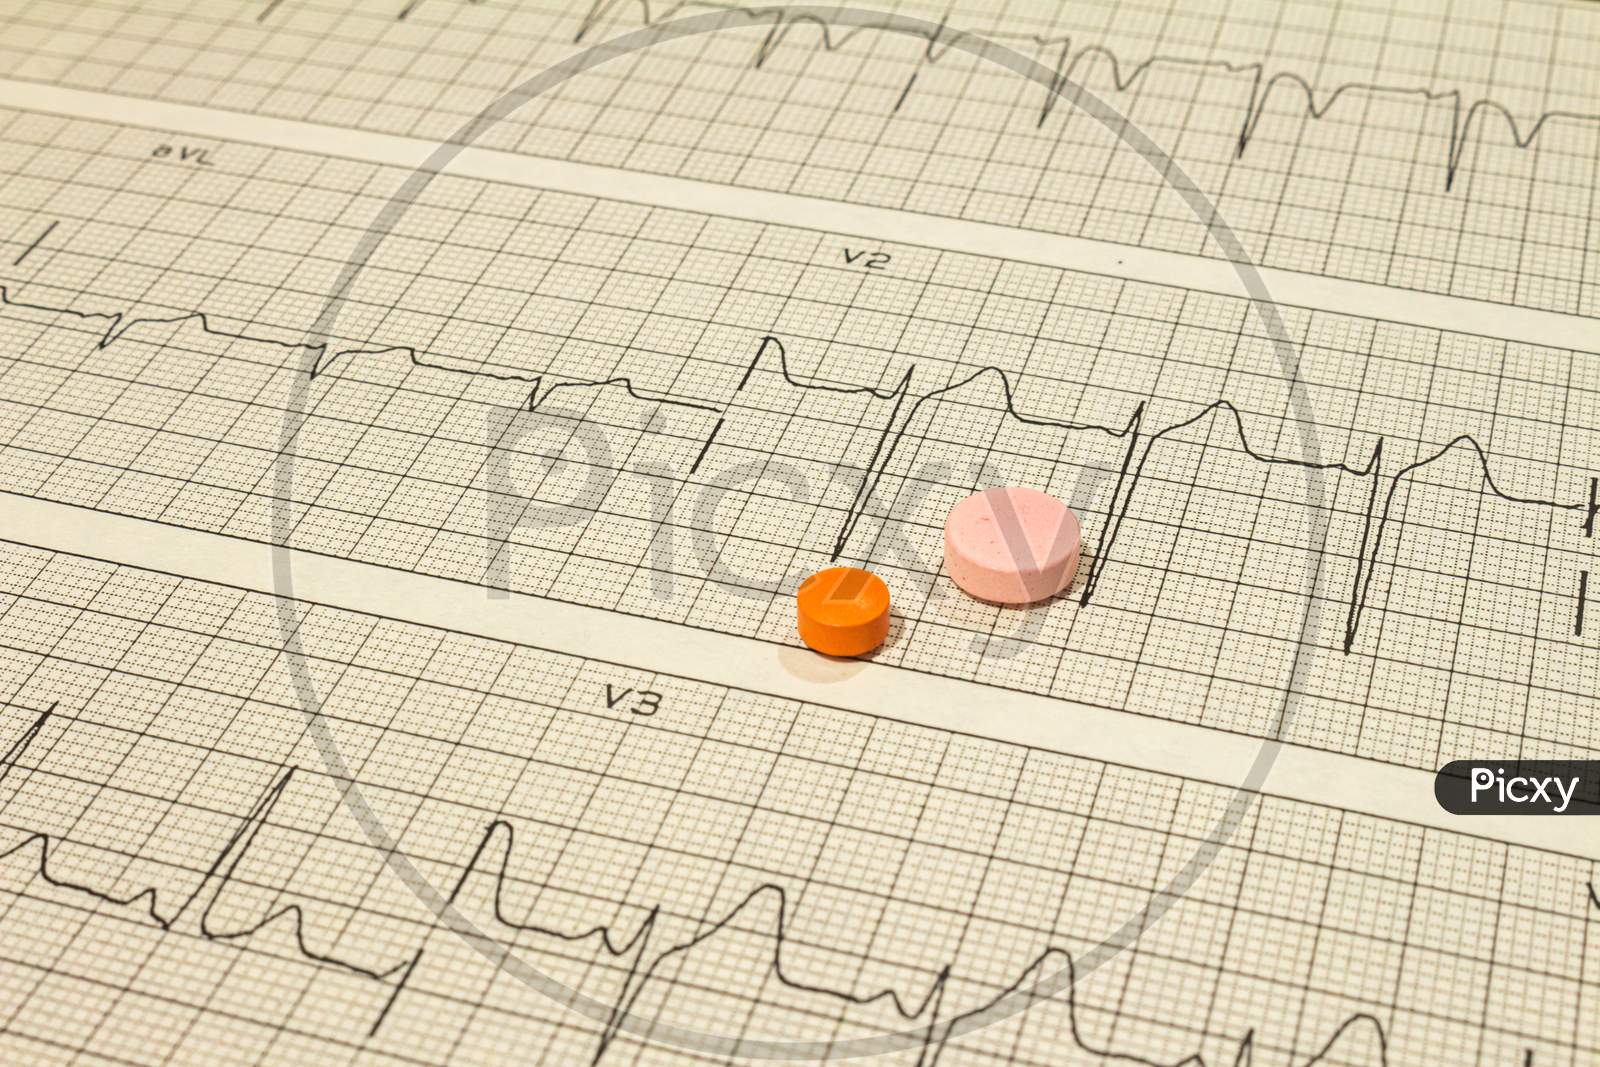 Some Pills On Electrocardiograms. Records Of Cardiac Activity. Drugs In Tablet Forms. Concept Of Cardiovascular Disease.